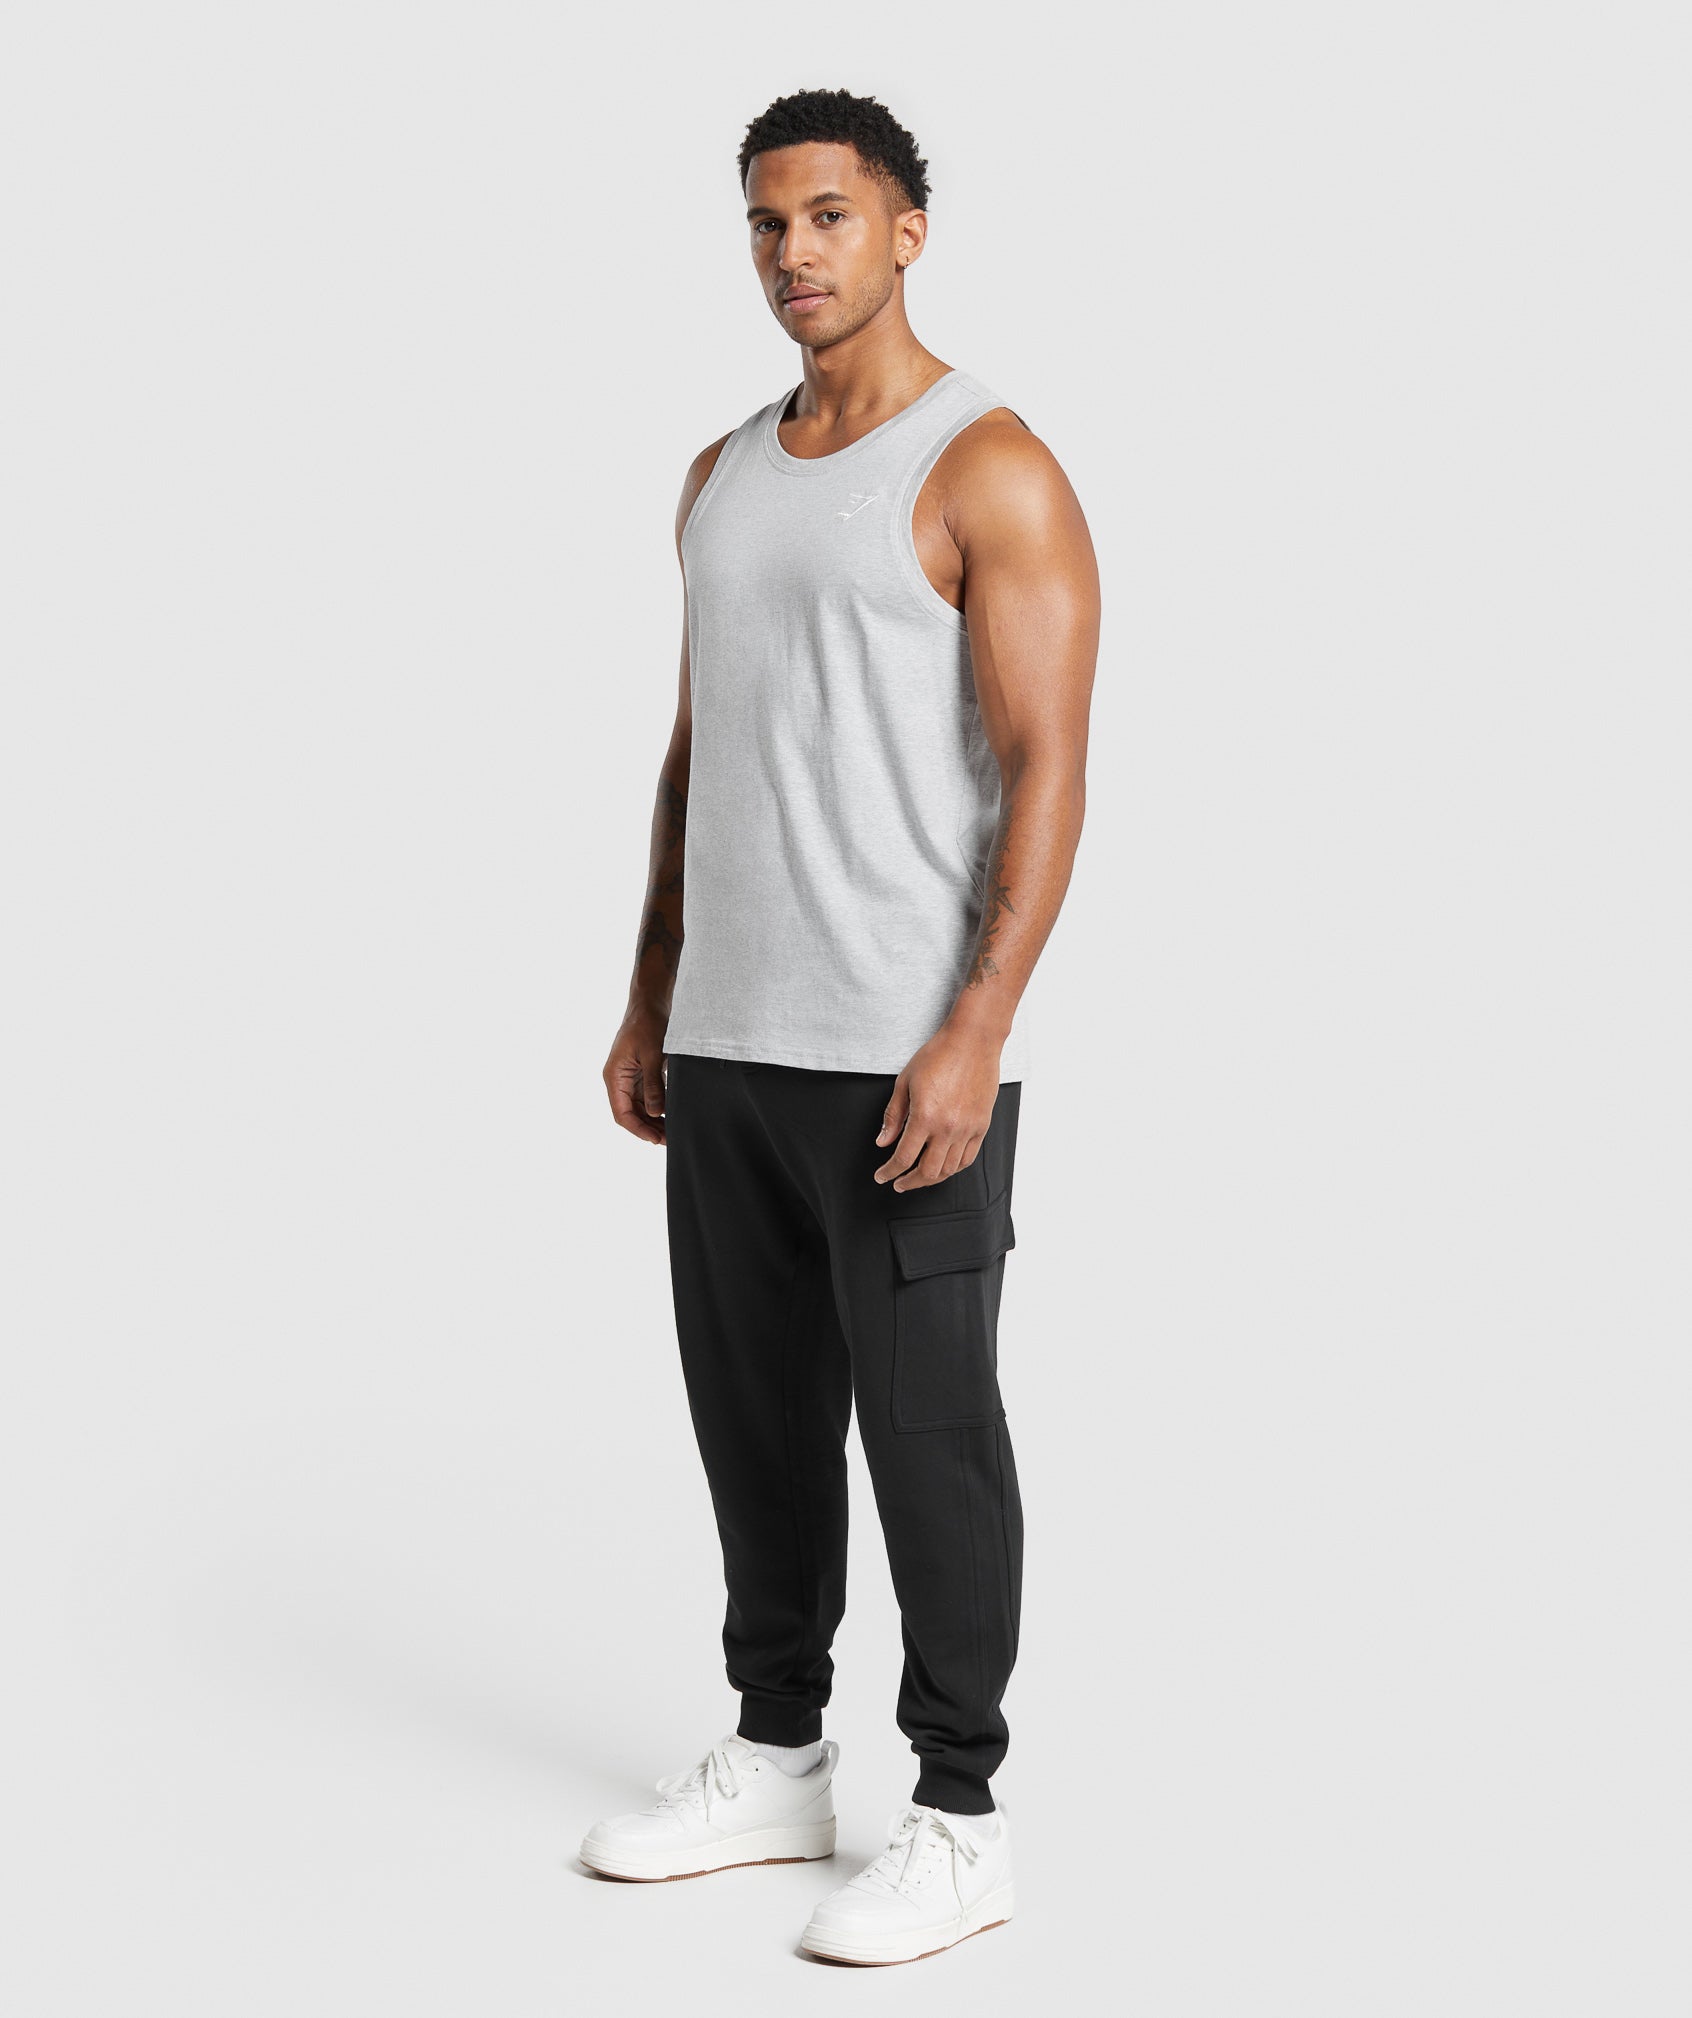 Crest Tank in Light Grey Core Marl - view 4